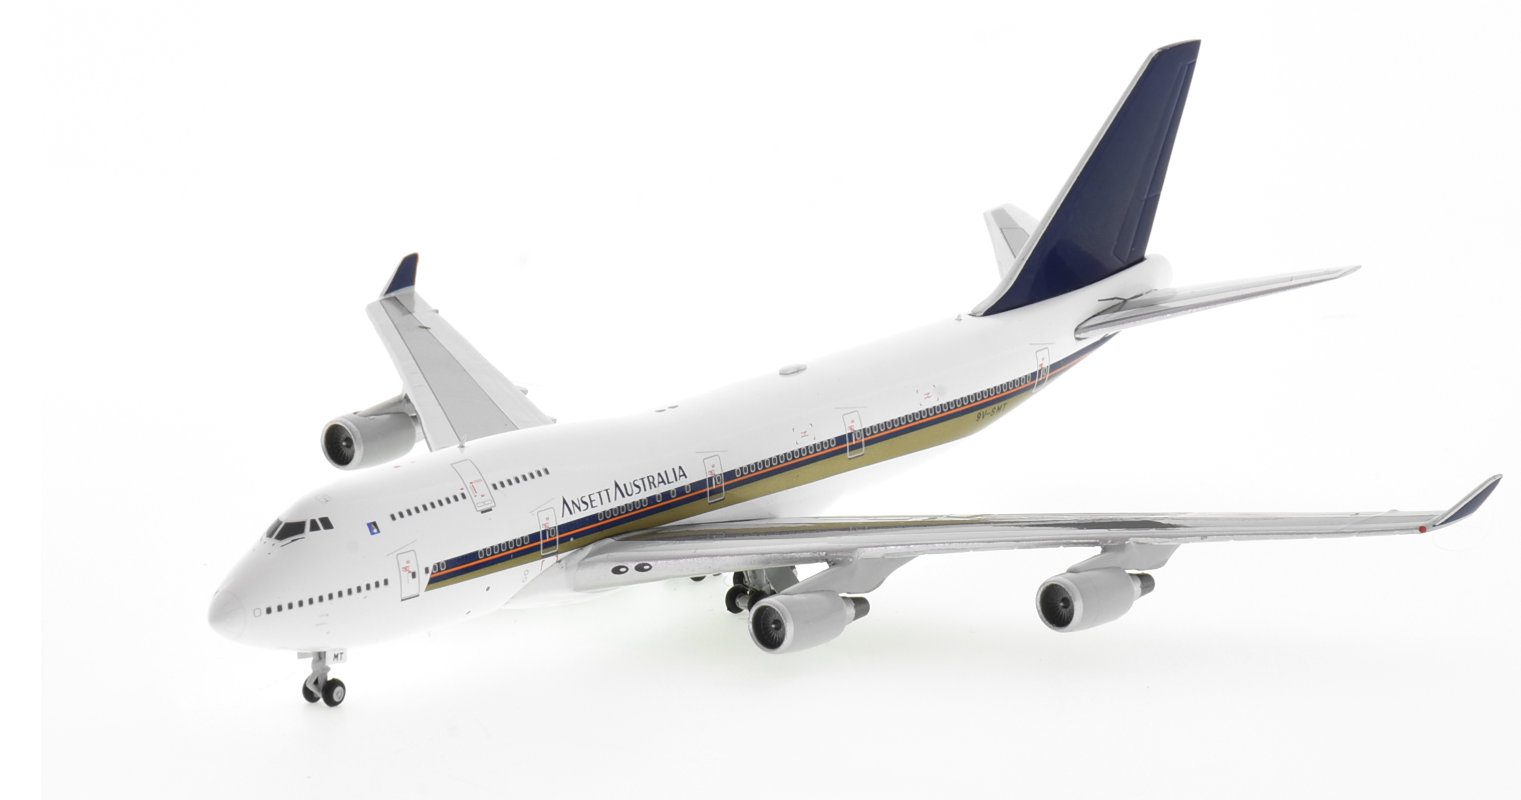 Front port side view of JC Wings EW4744005 - Boeing 747-400 1/400 scale diecast model, registration 9V-SMT, in Singapore Airlines's livery with Ansett Australia tittles.